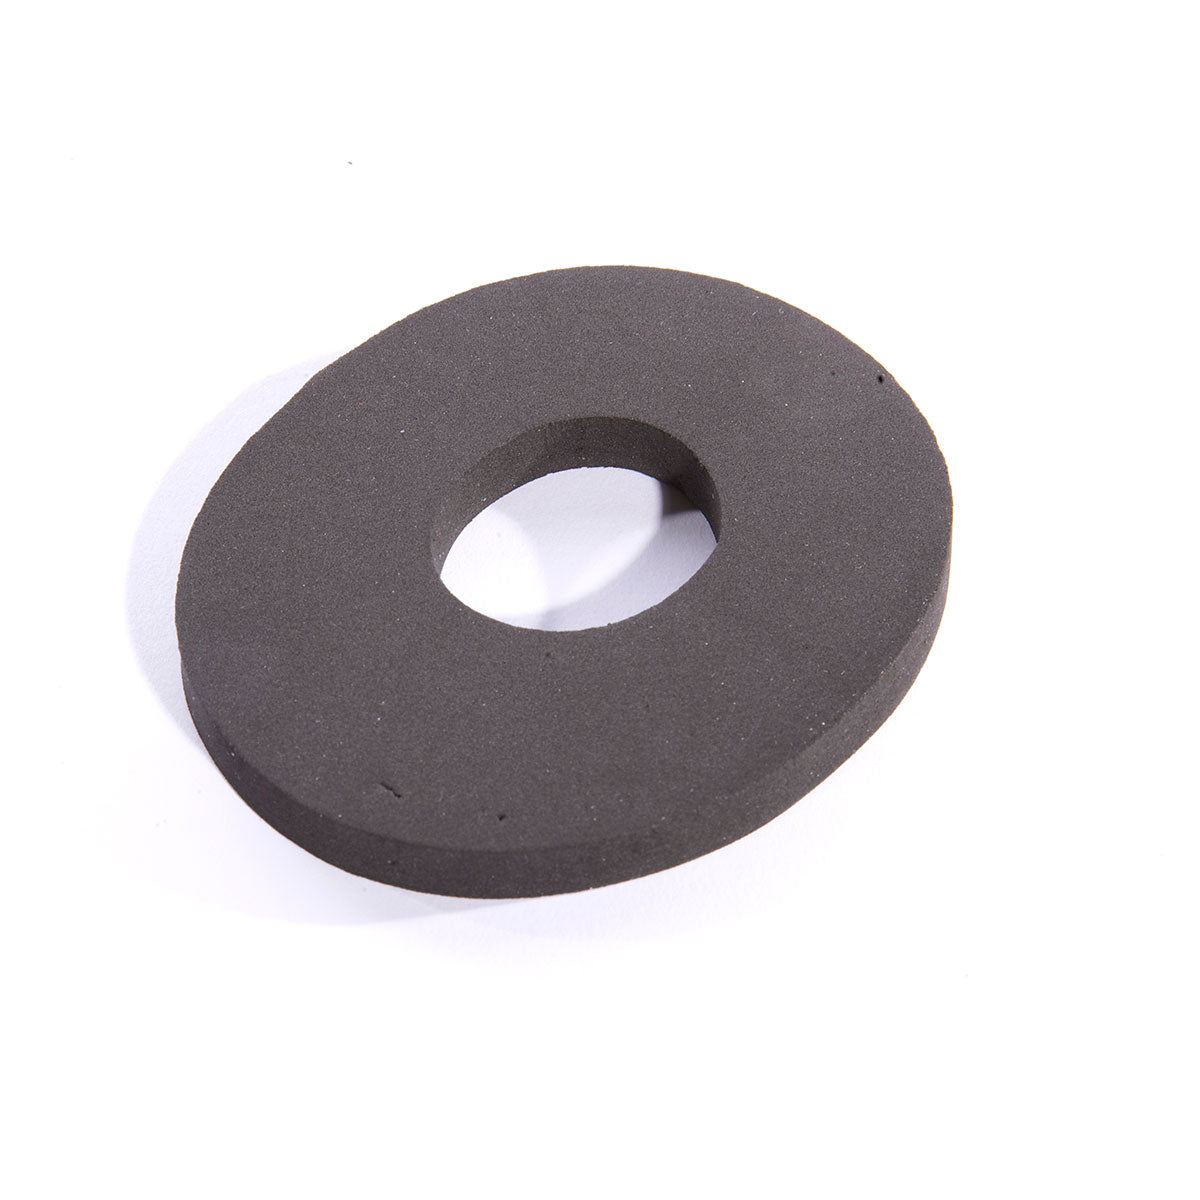 SpareParts O-Stabilizer Ring - Large